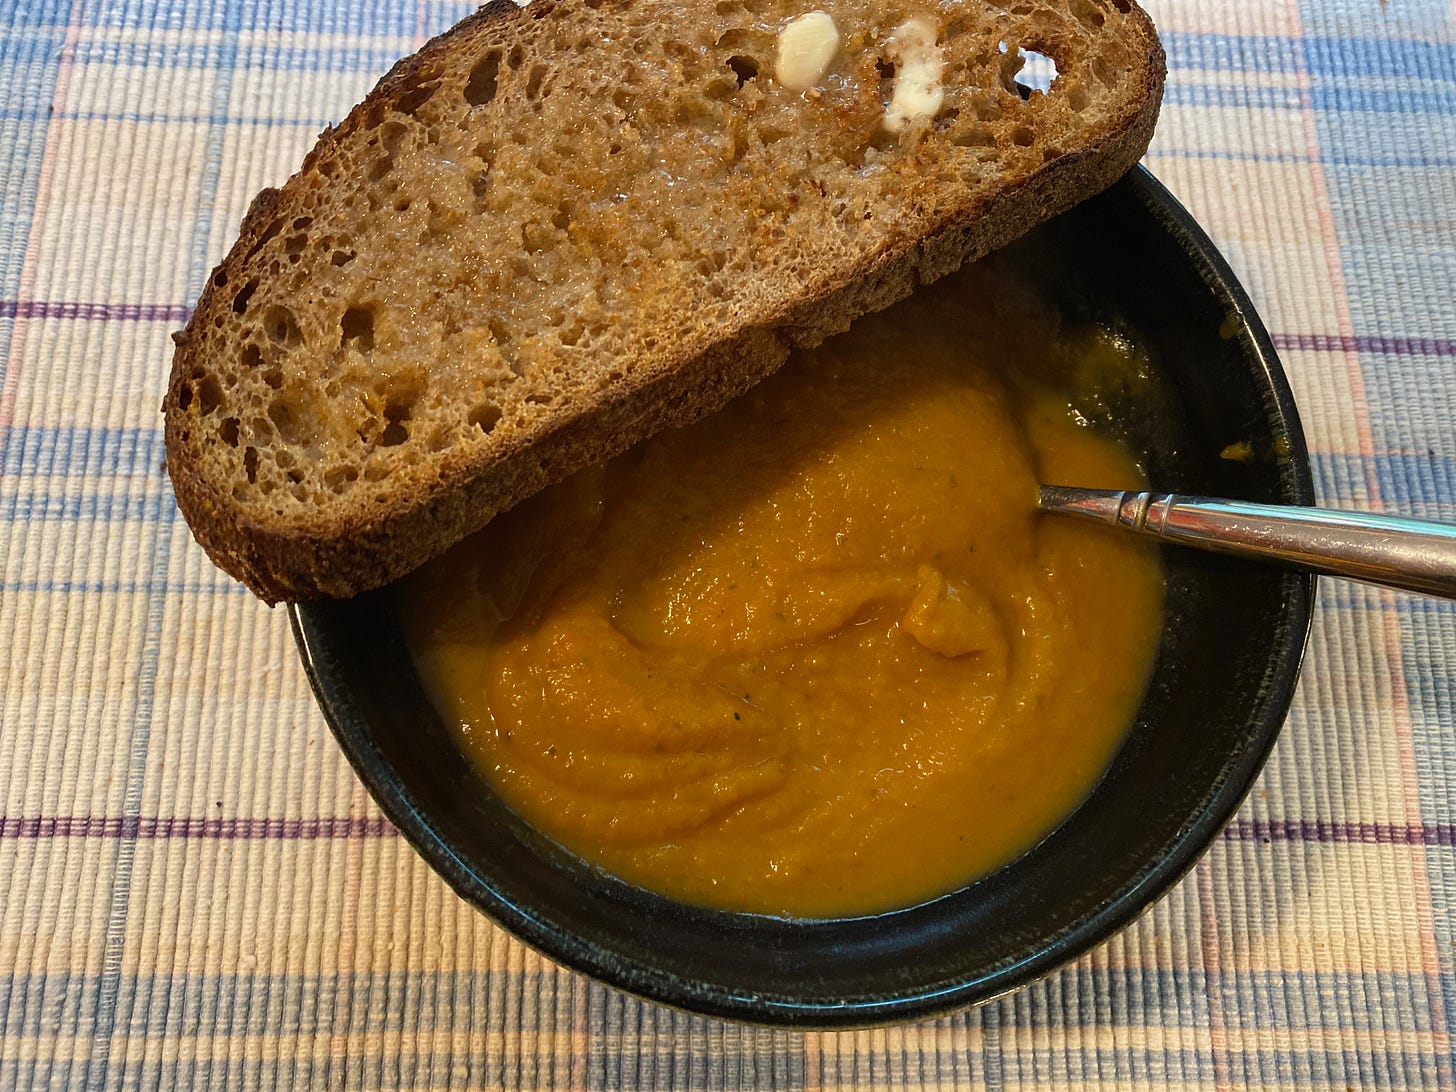 A ceramic bowl or sweet potato soup sits on a blue and white placemat. A slice of buttered toast sits on the edge of the bowl.